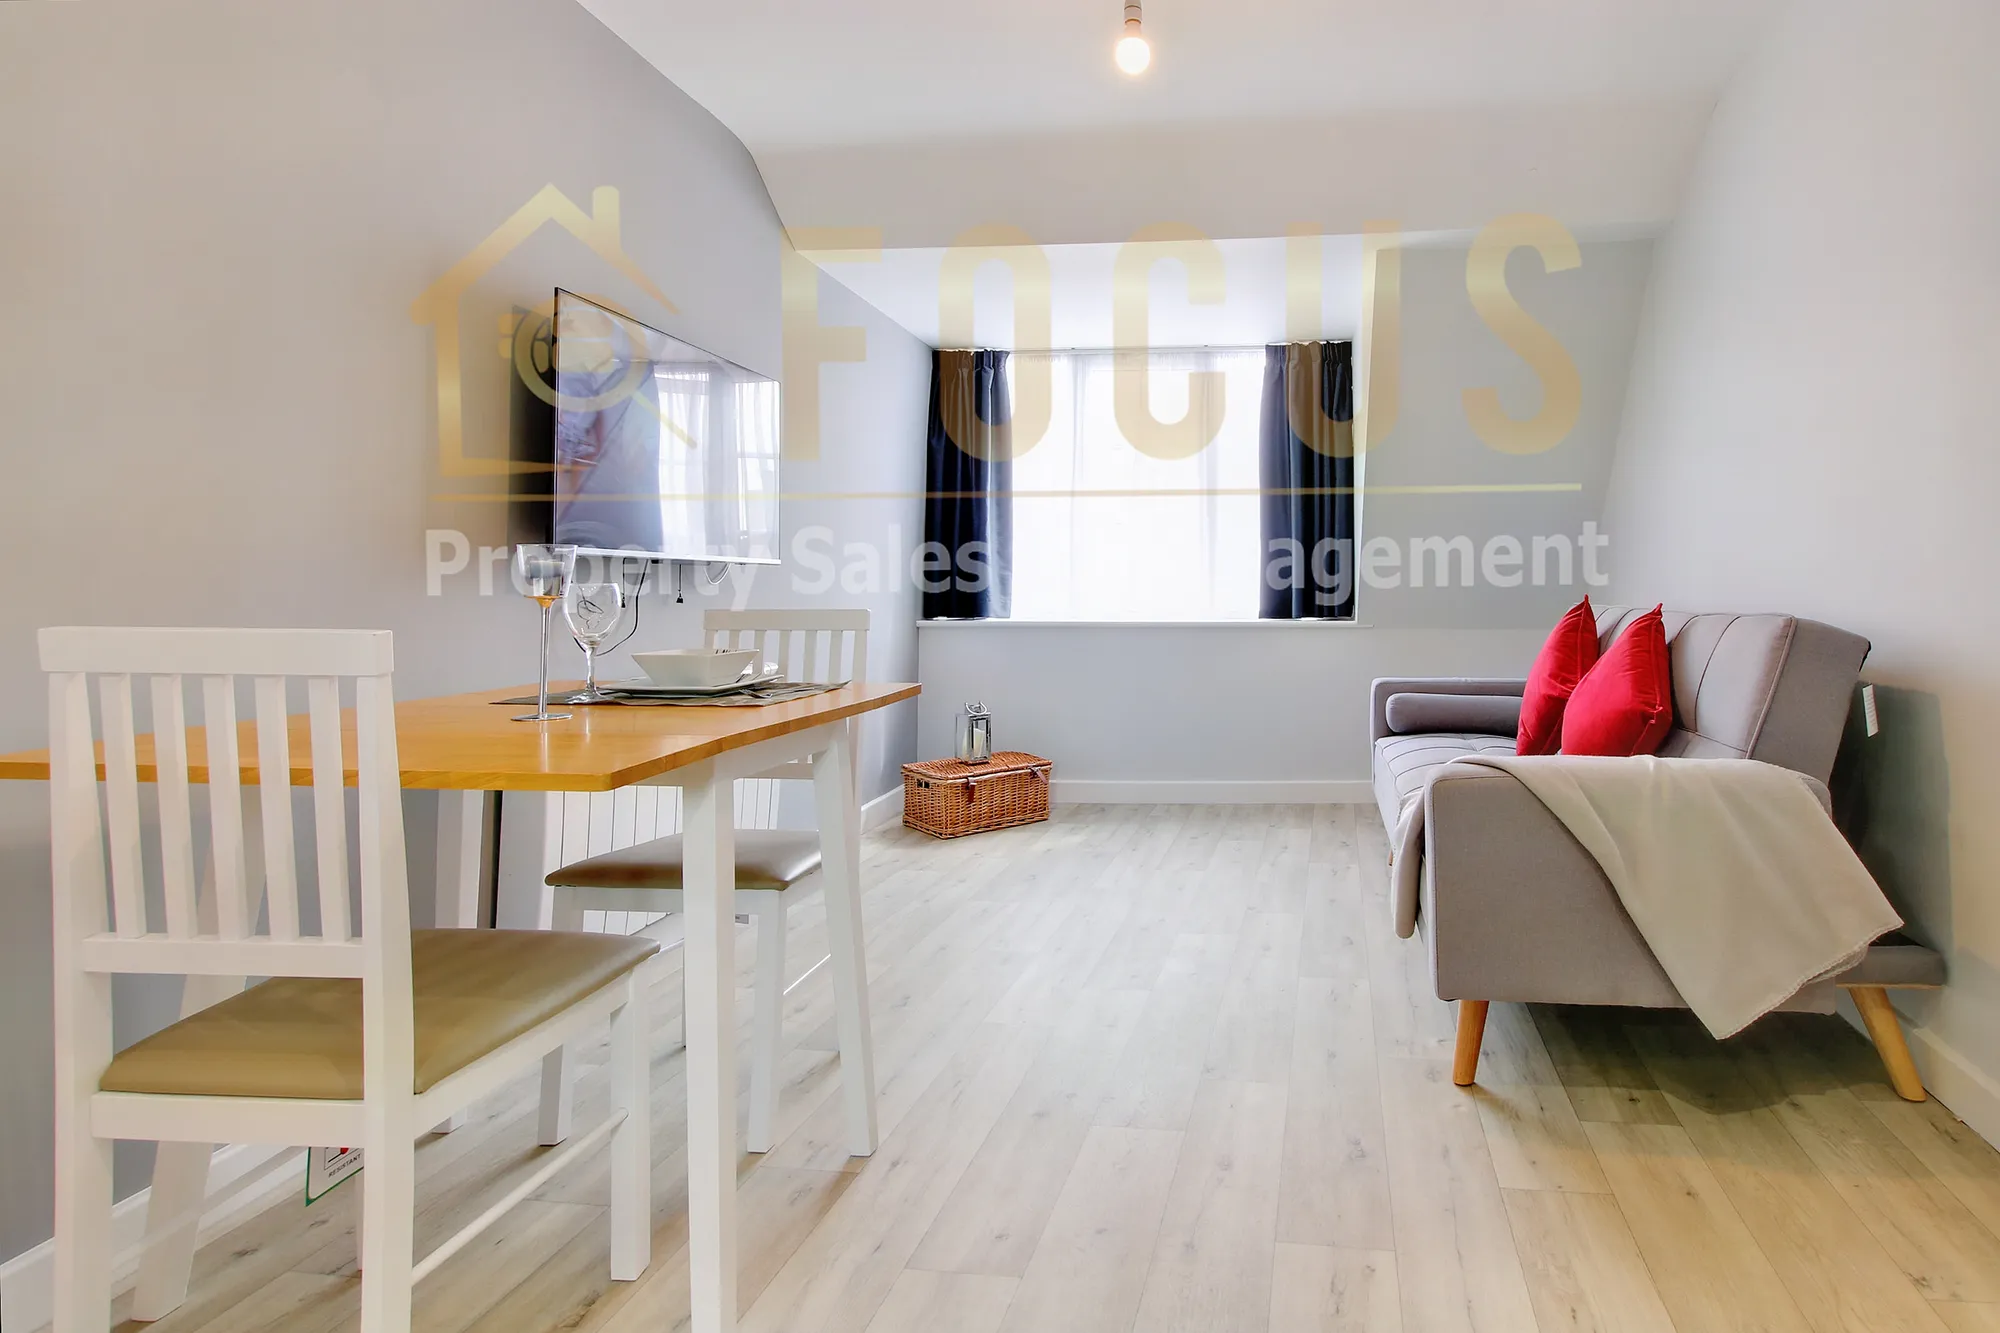 1 bed flat to rent in Clarendon Park Road, Leicester - Property Image 1